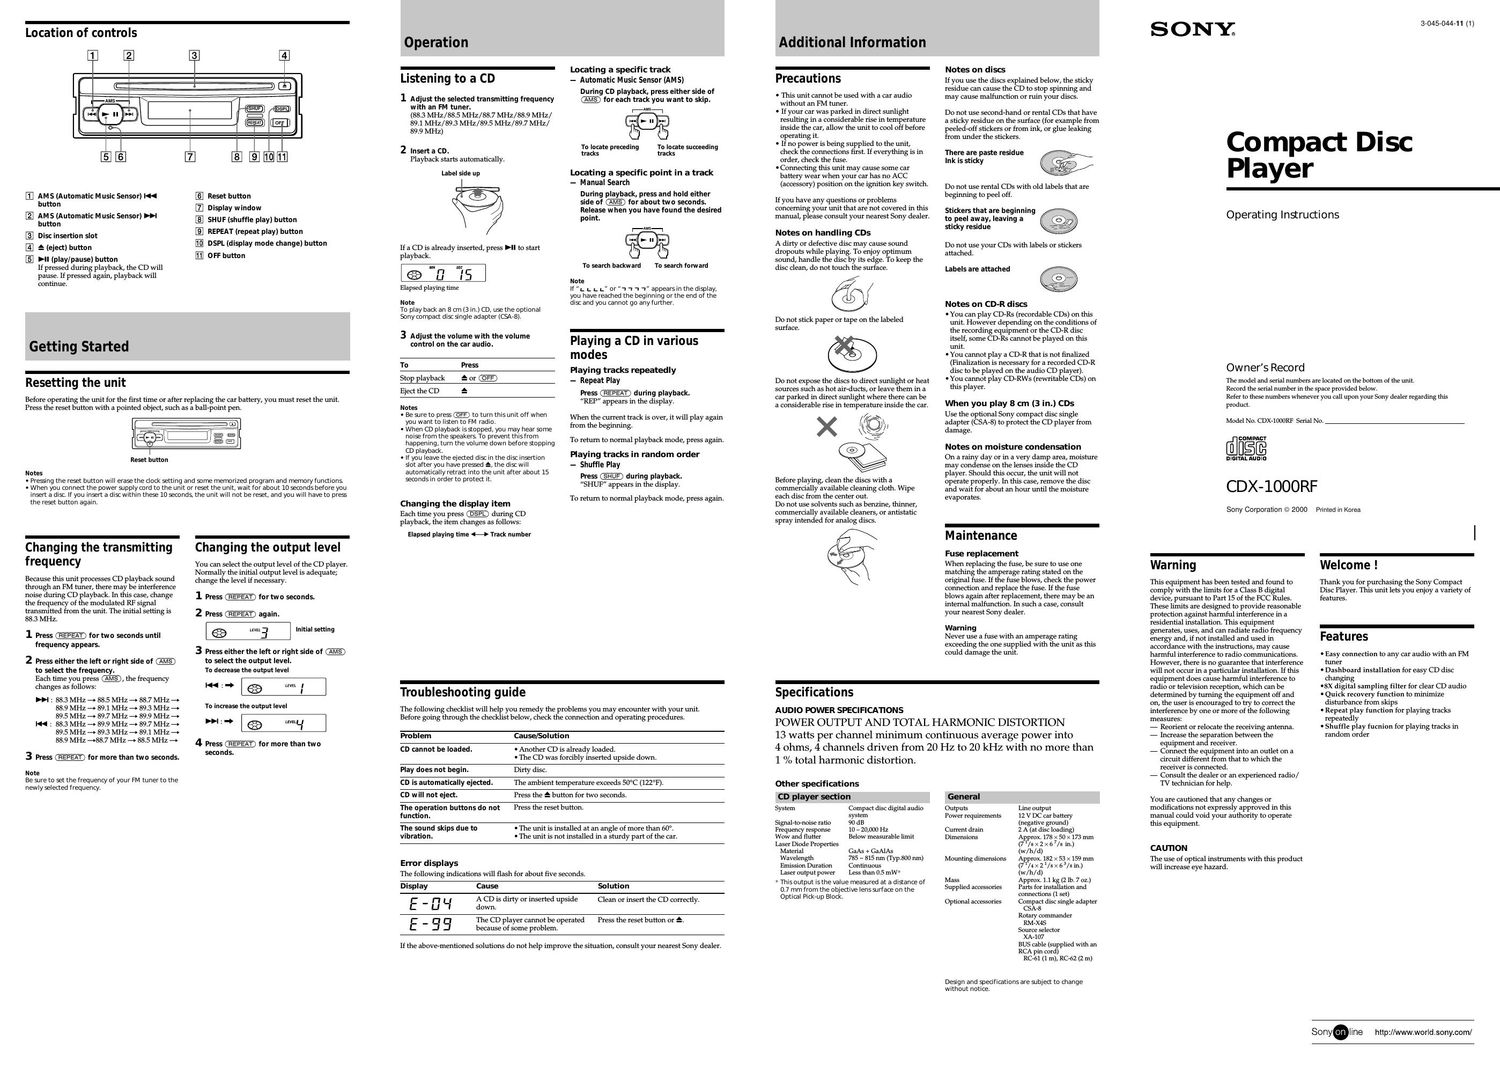 sony cdx 1000 rf owners manual